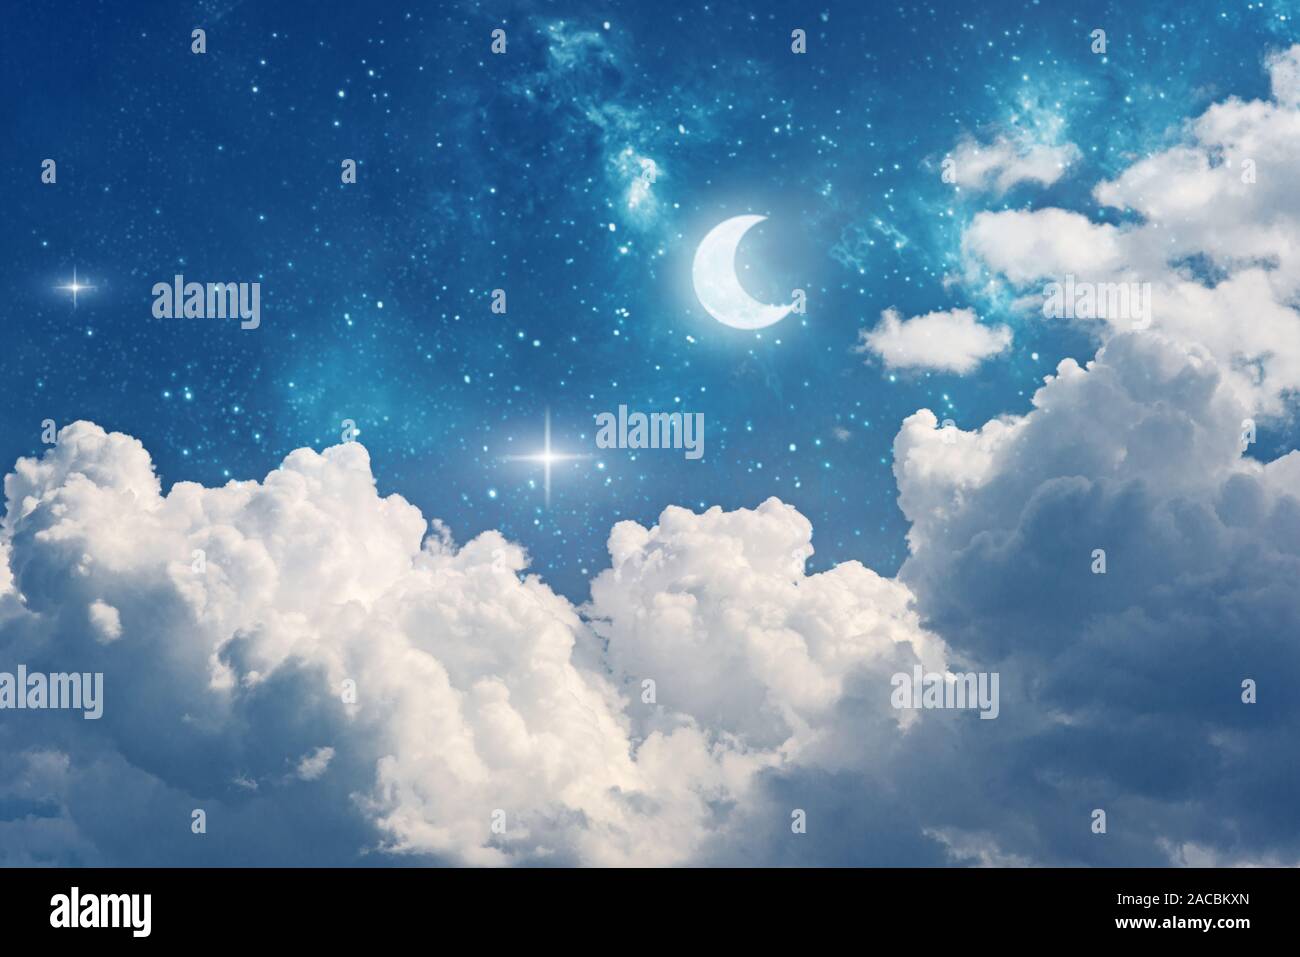 Fantasy Night Sky Background With Stars Moon And Clouds Stock Photo Alamy